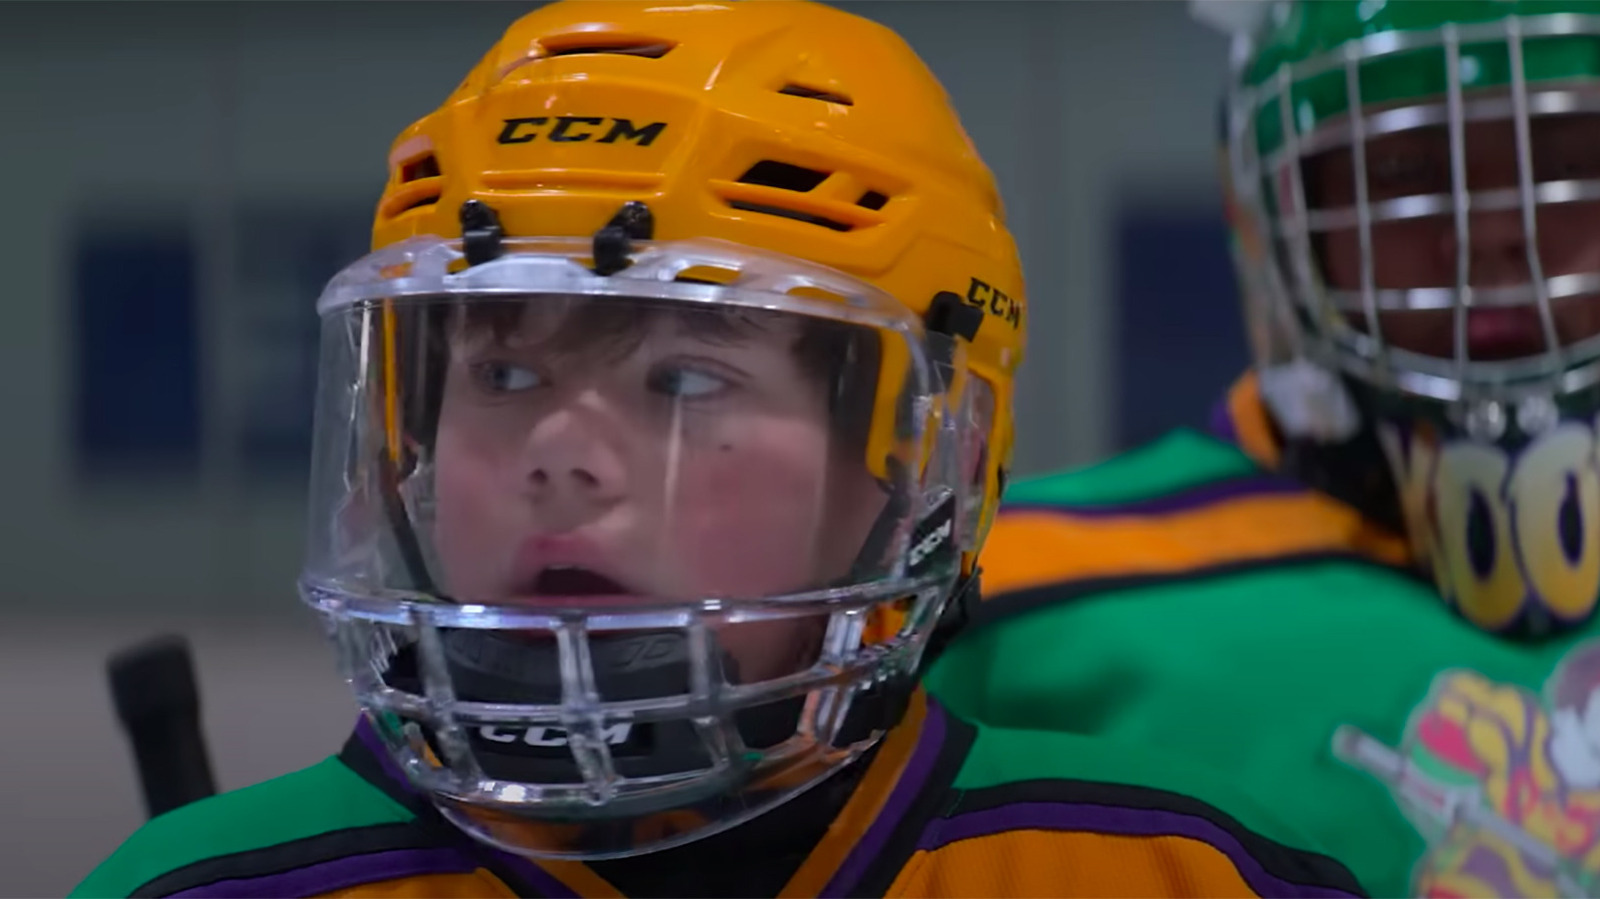 The Mighty Ducks Game Changers Brady Noon Ice Hockey Jersey of Evan Morrow  (Brady Noon) in The Mighty Ducks: Game Changers (S02E01)